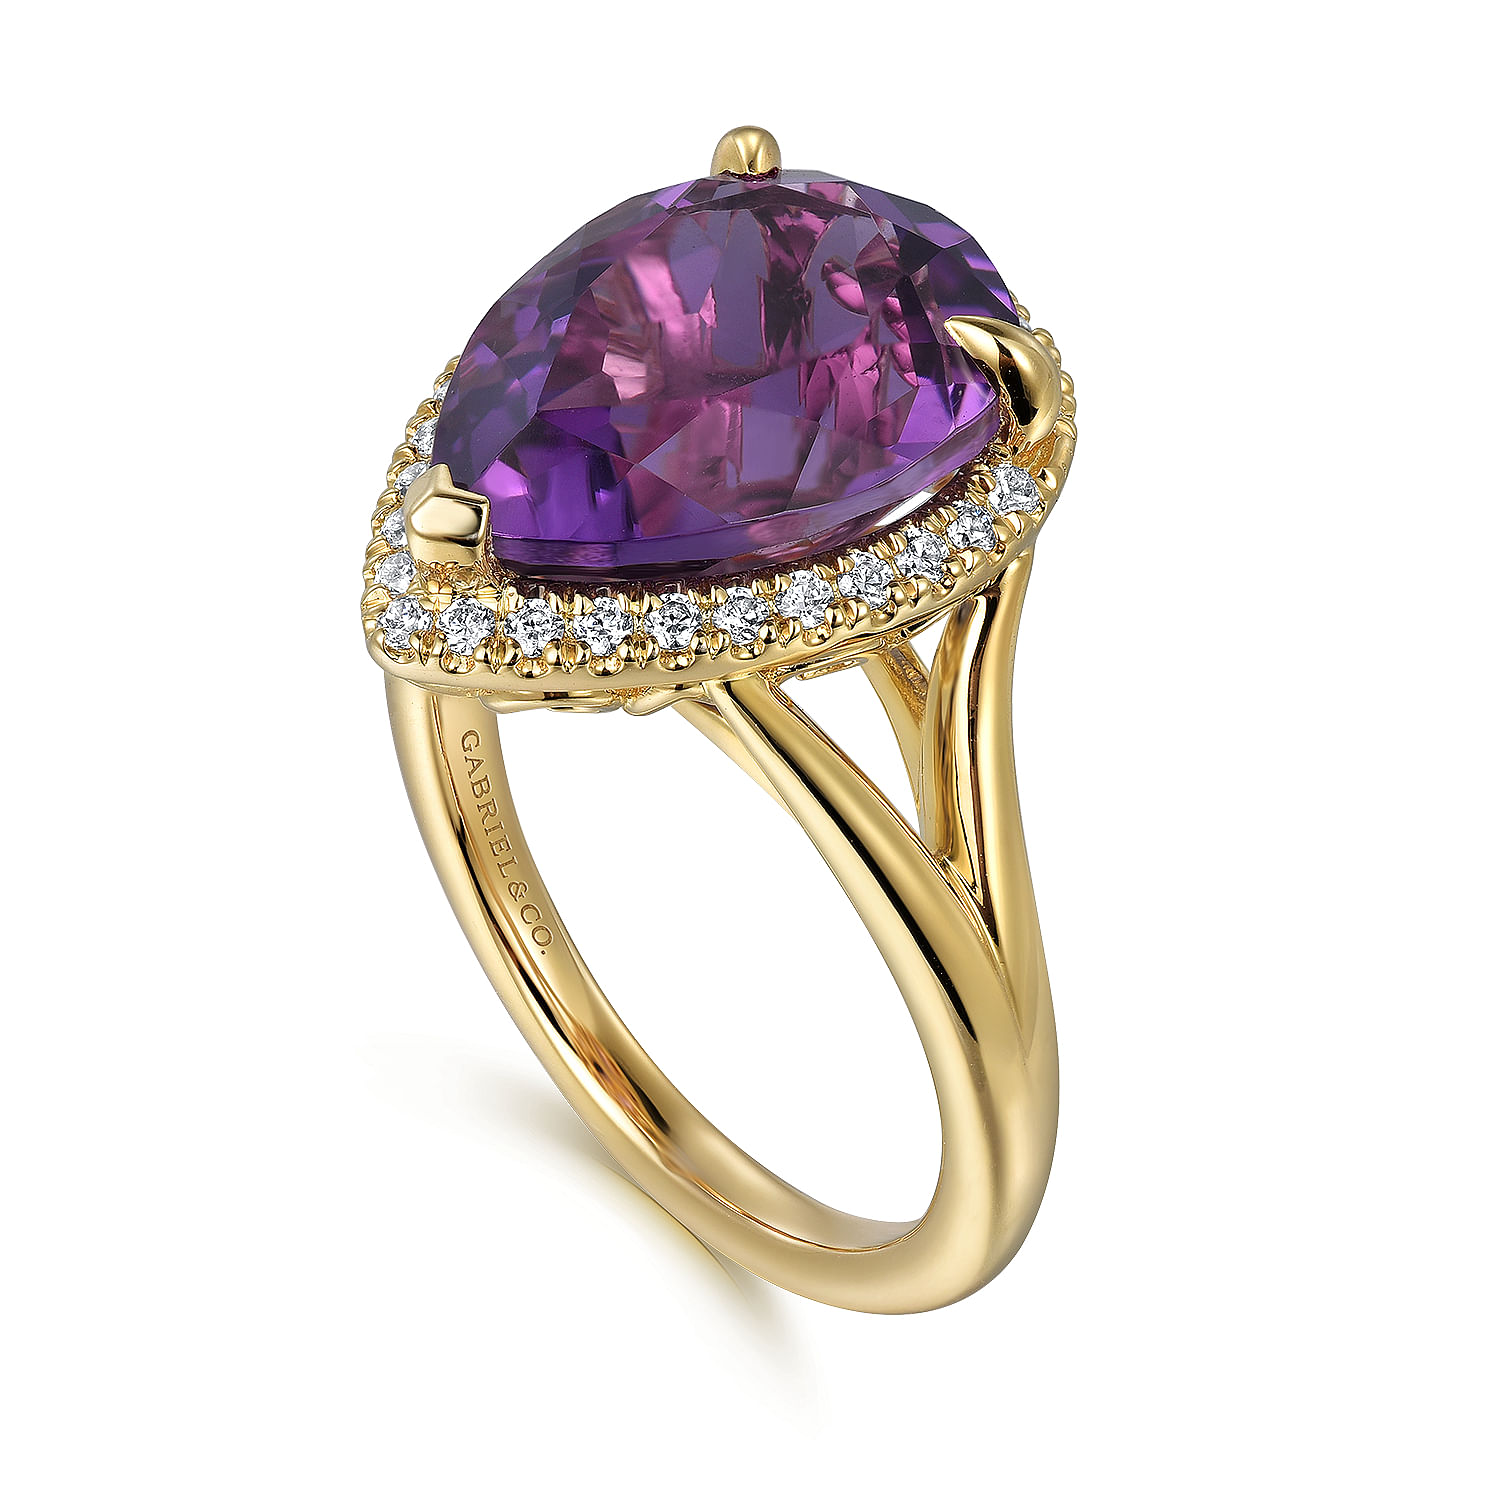 14K Yellow Gold Diamond and Flat Pear Shape Amethyst Ladies Ring With Flower Pattern Gallery